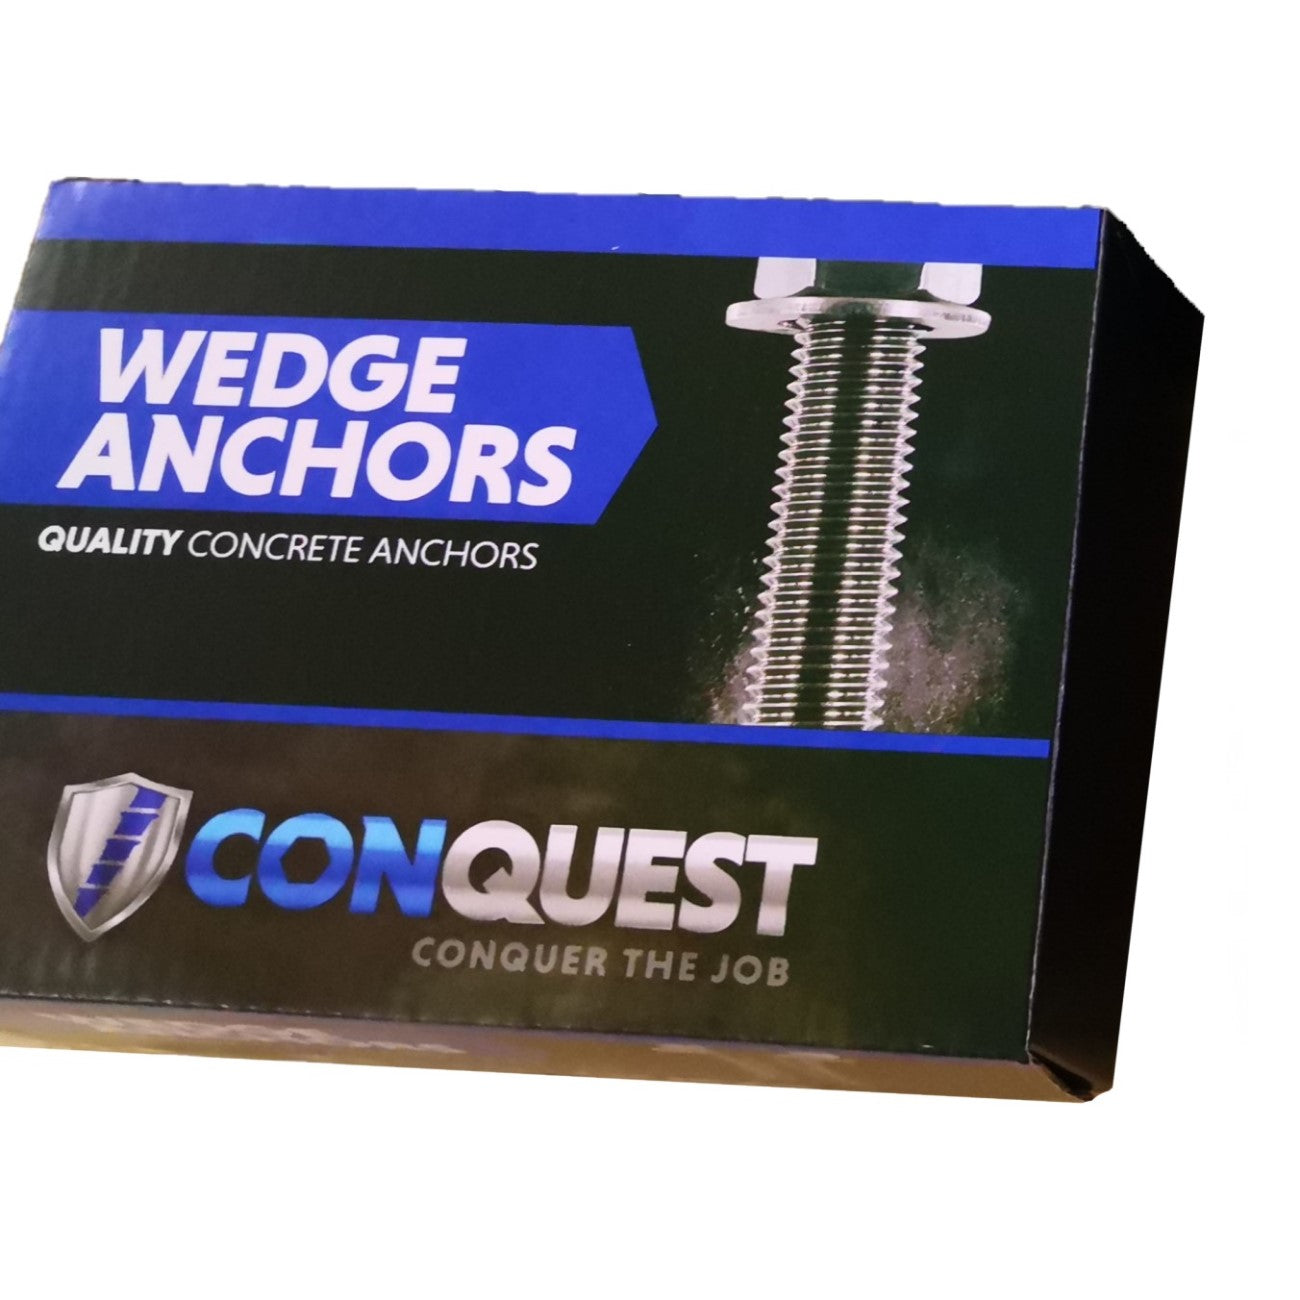 1/2" x 4-1/2" Conquest Wedge Anchors - 304 Stainless Steel, Pkg 25